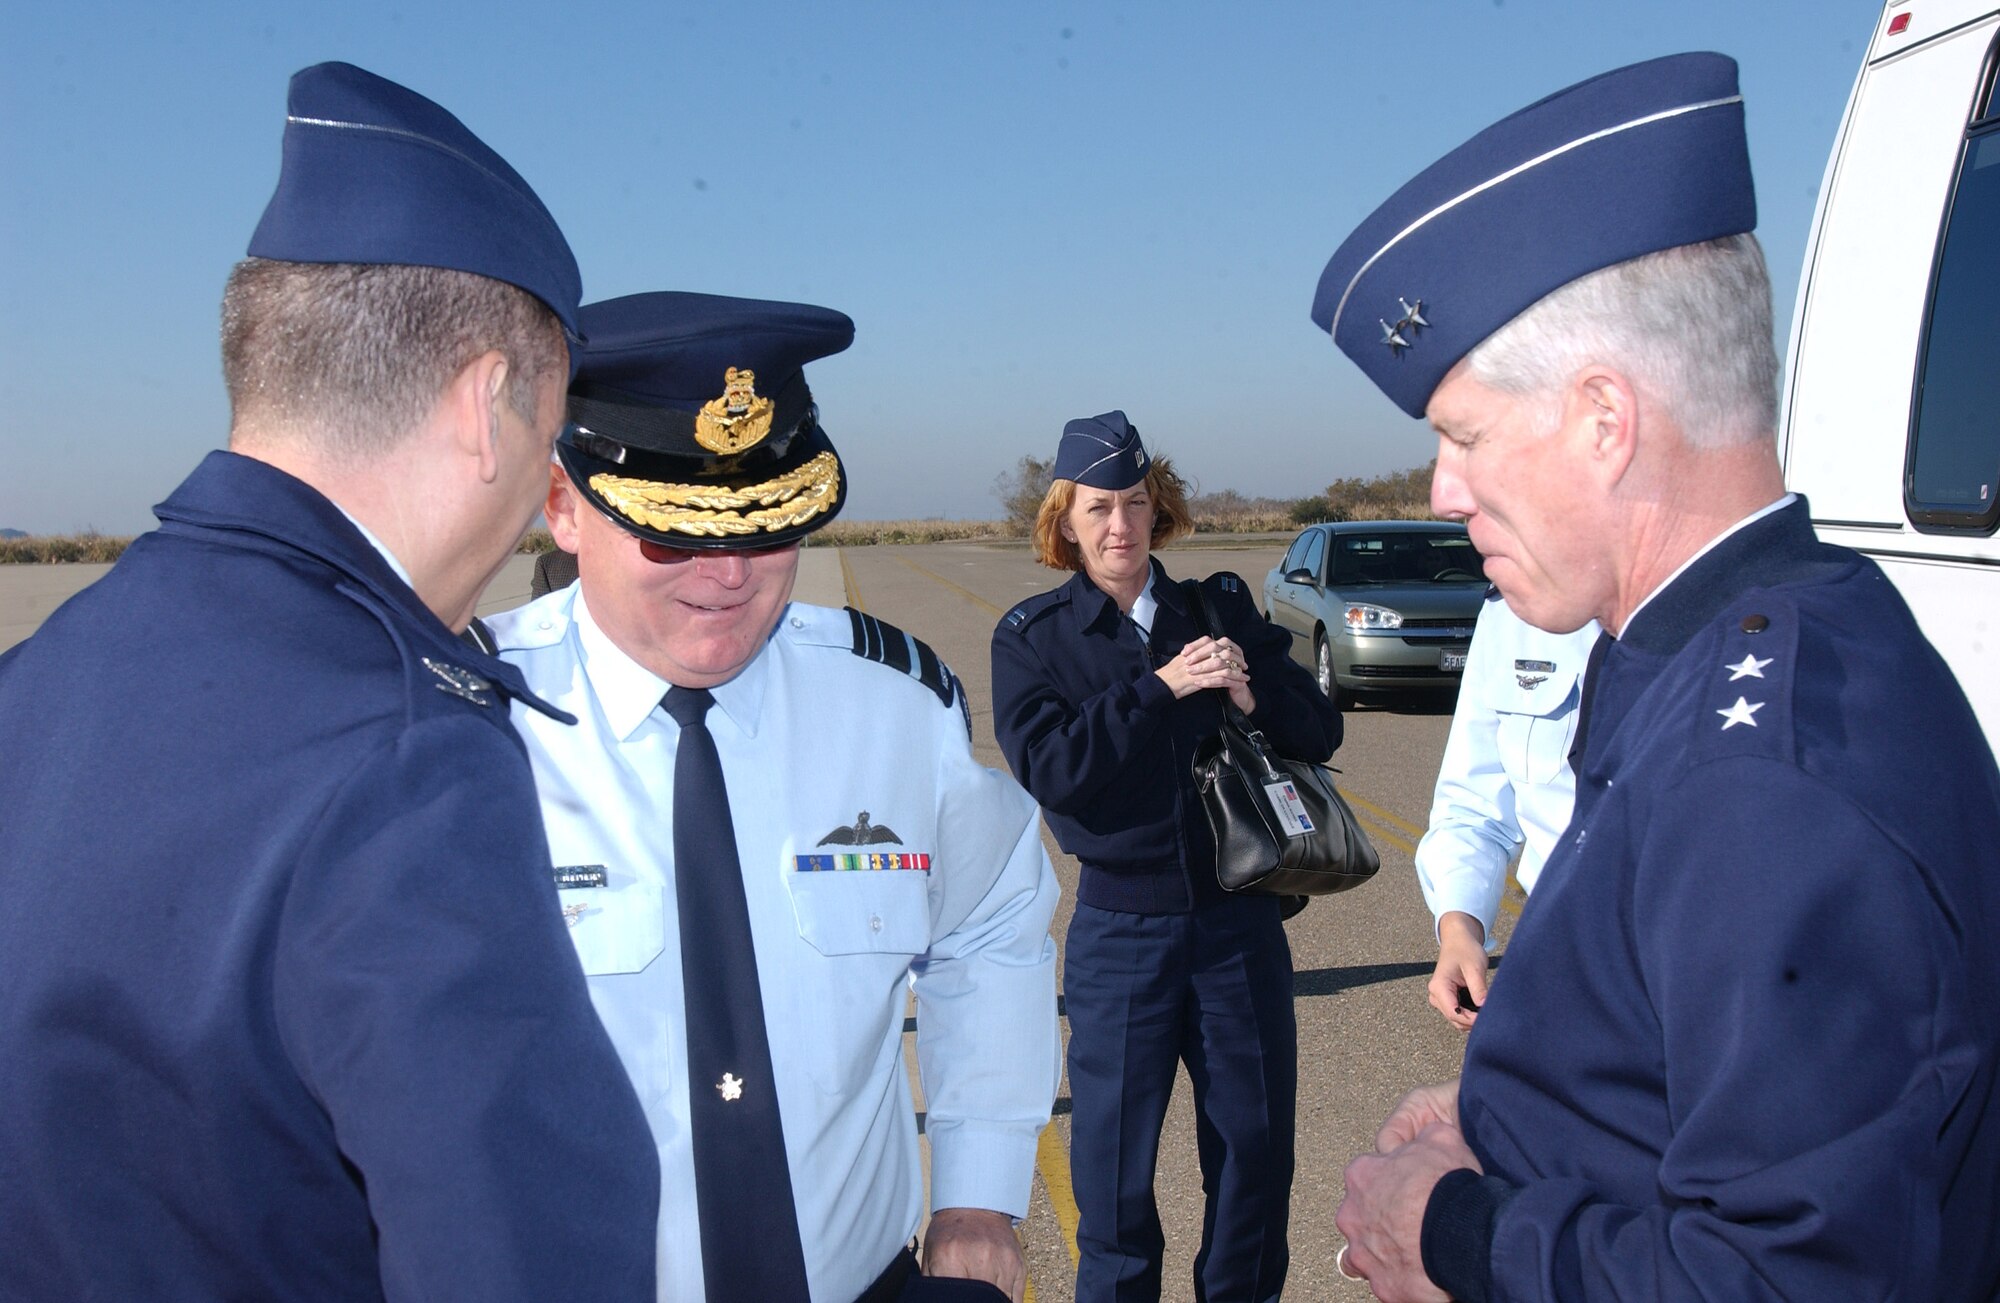 Maj. Gen. William Shelton,14th Air Force commander and Col. Jack Weinstein, 30th Space Wing commander, bid farewell to Air Marshall Geoffrey Shepherd, Chief of Air Force, Royal Australian Air Force at Vandenberg AFB, Calif. on Jan 15.  Air Marshall Shepherd visited Vandenberg as well as several other Air Force bases to get an orientation of how the Air Force operates.  (United States Air Force Photo by Airman Adam Guy)